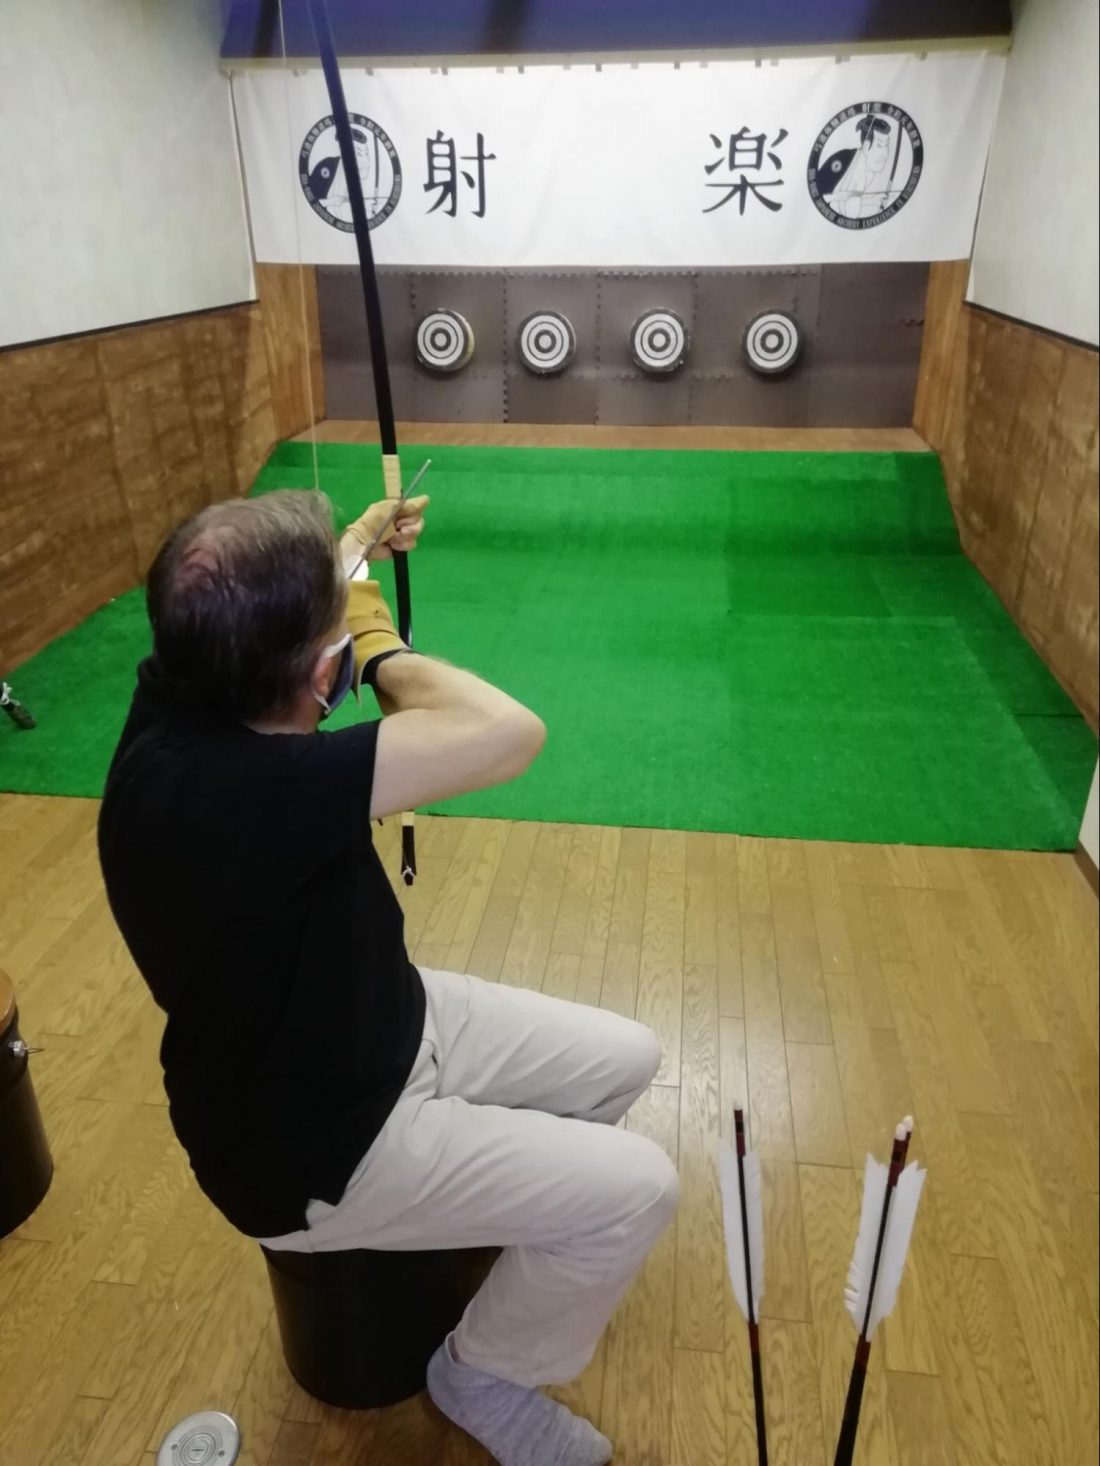 TAKE AIM AT A TRULY UNIQUE AND MEMORABLE EXPERIENCE WHILE IN HIROSHIMA